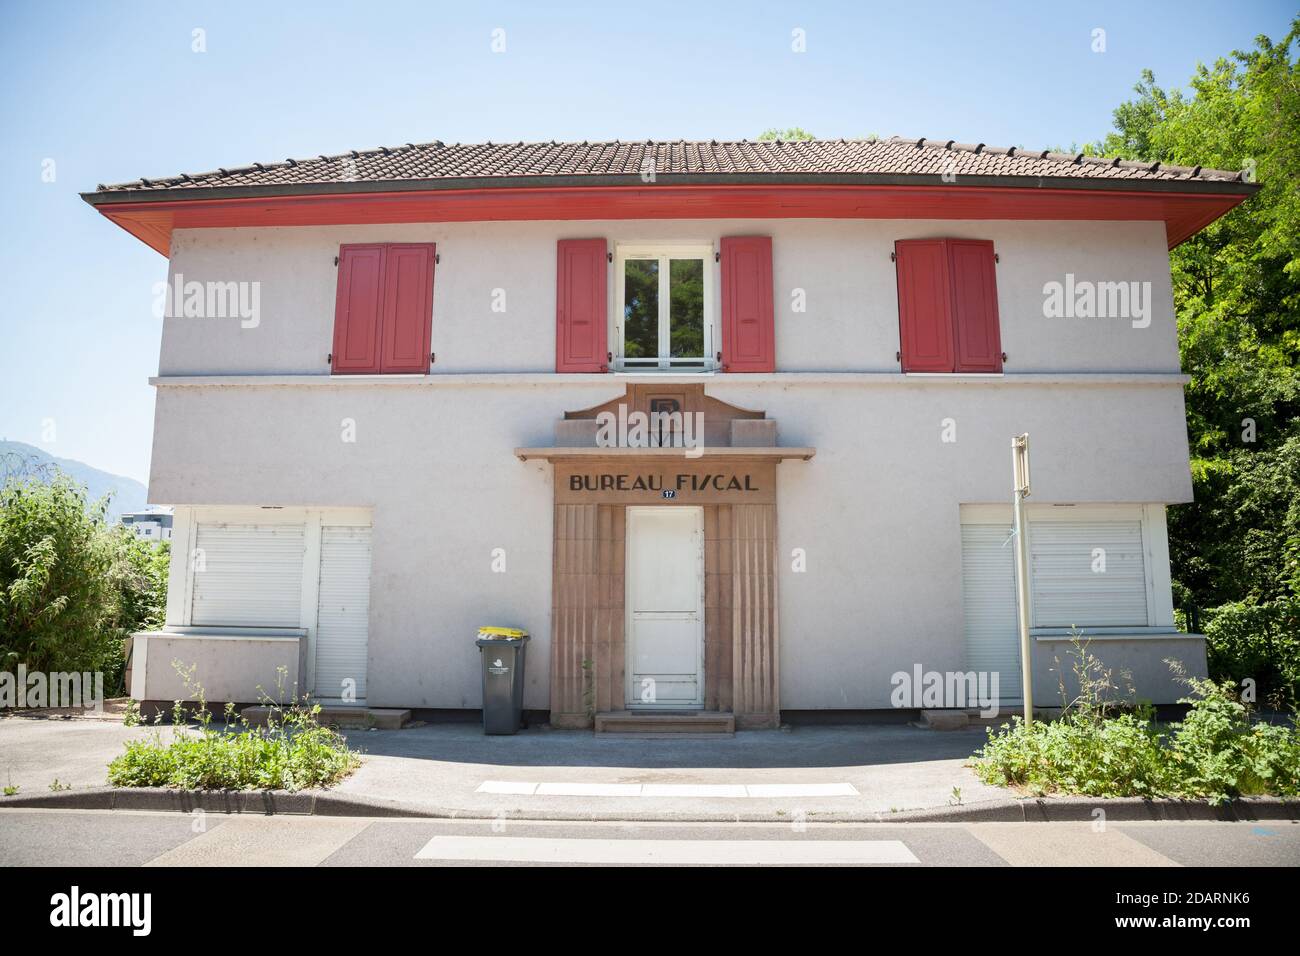 AMBILLY, FRANCE - JUNE 18, 2017: Douane de Mon Idee a French customs building at the abandoned border crossing between France and Switzerland closed s Stock Photo